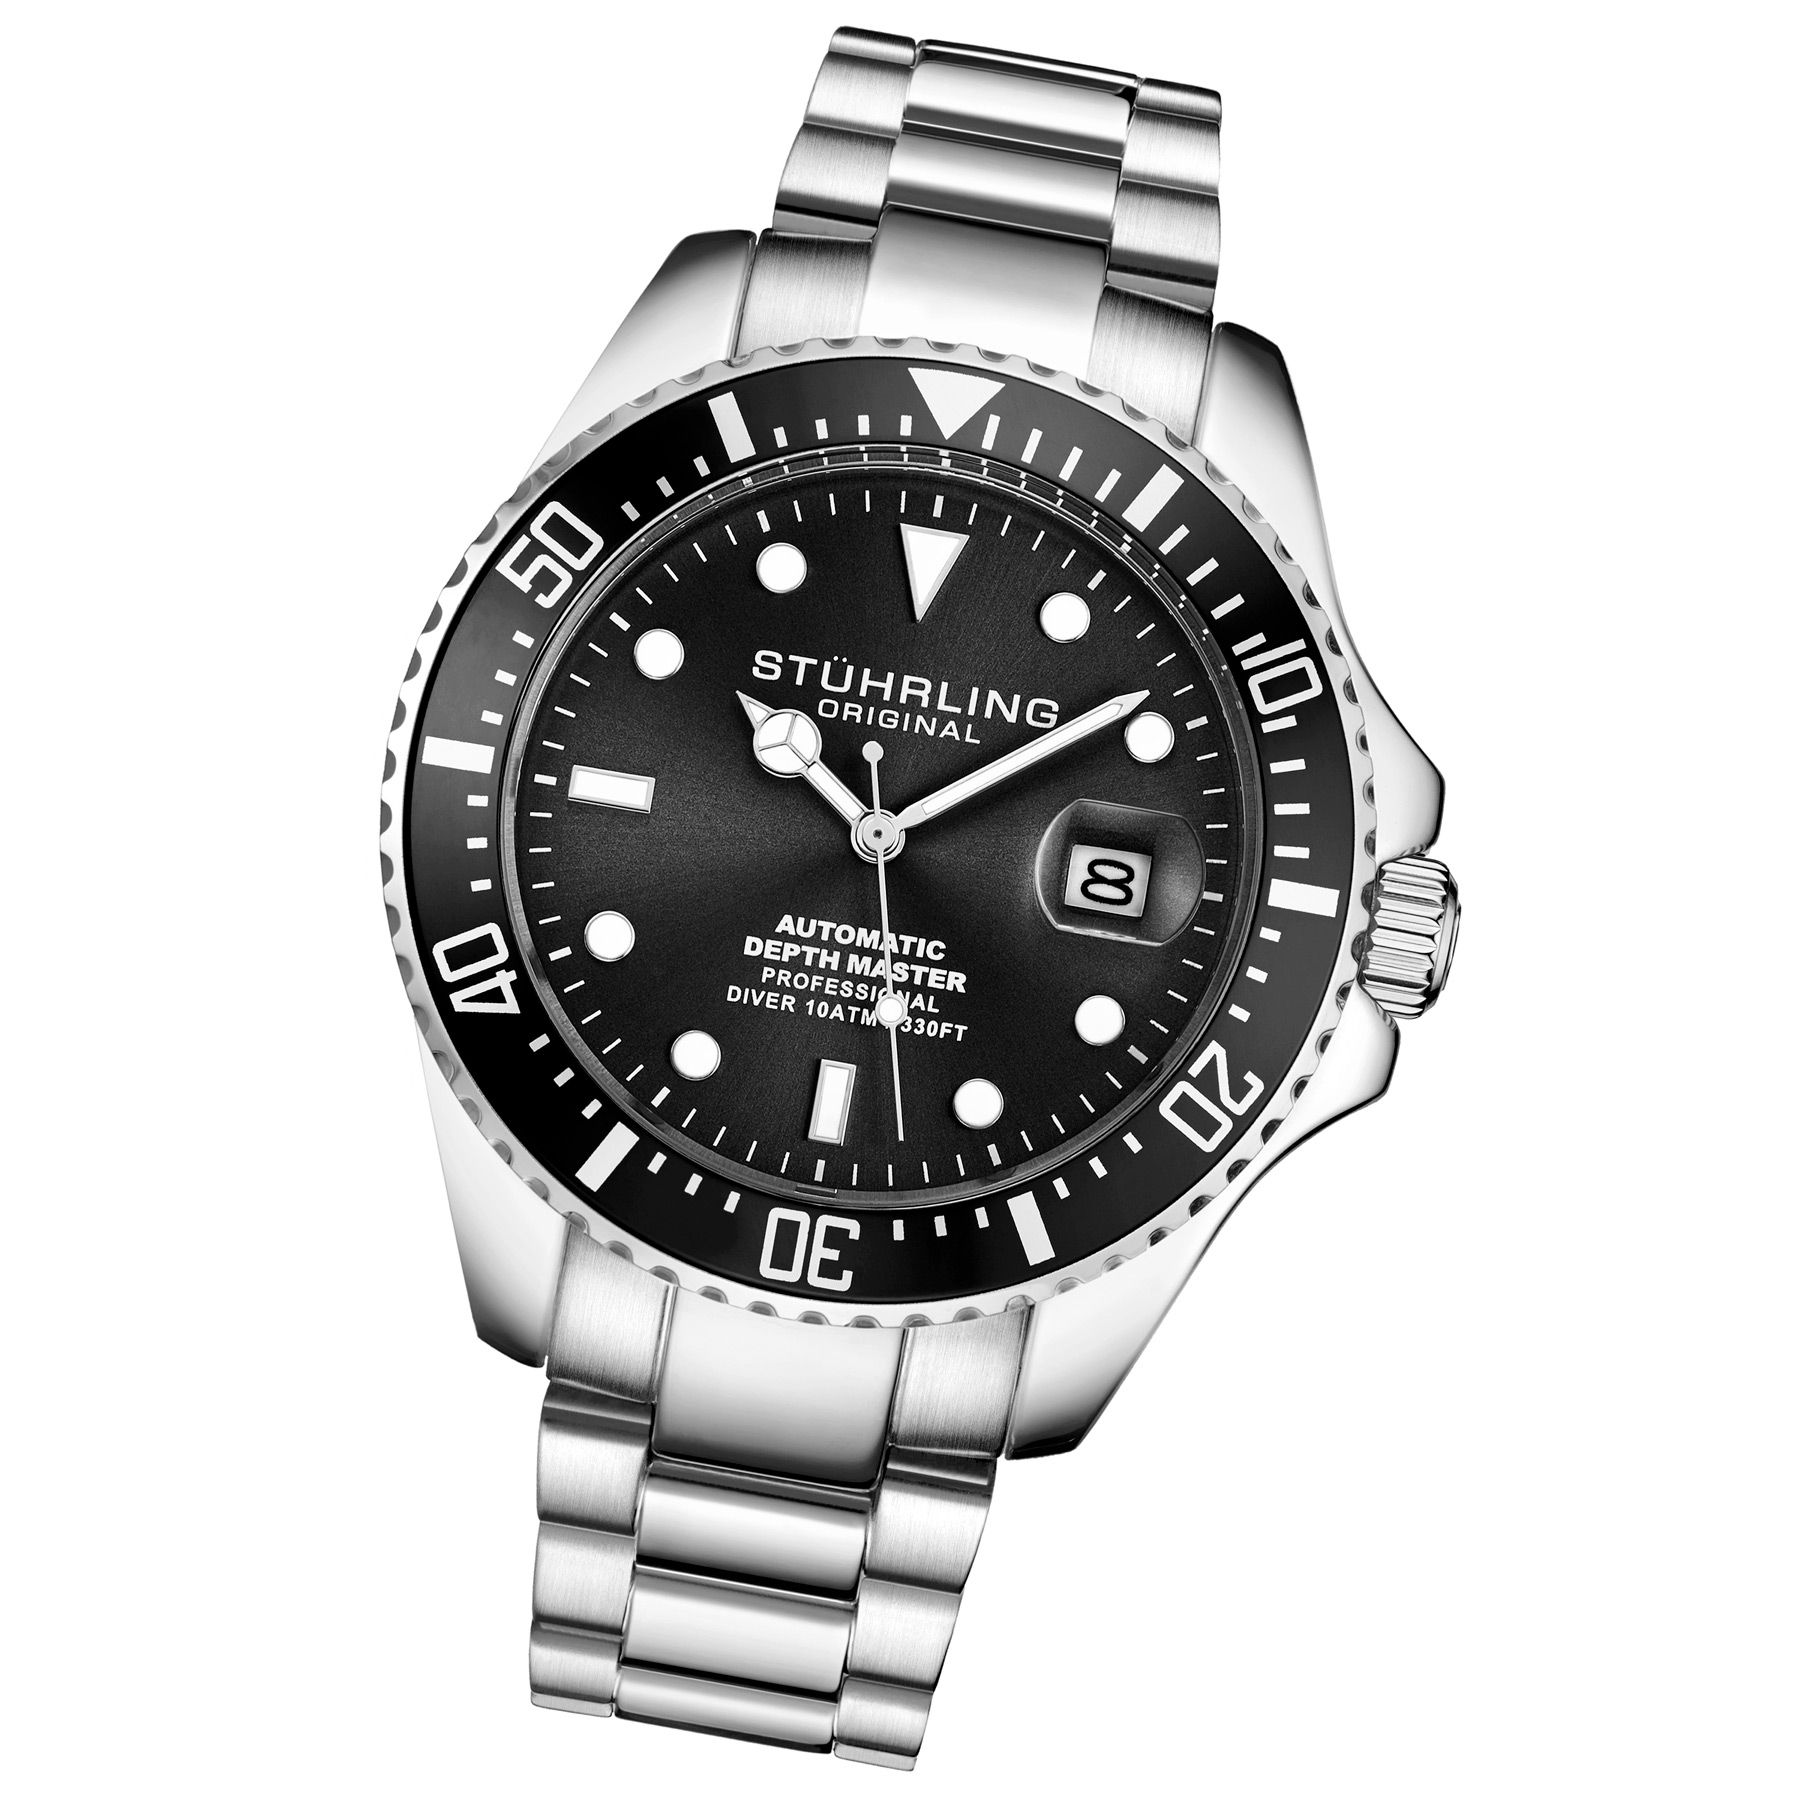 Men's Automatic Diver Watch, Silver Case, Black Dial, Silver Stainless Steel Bracelet